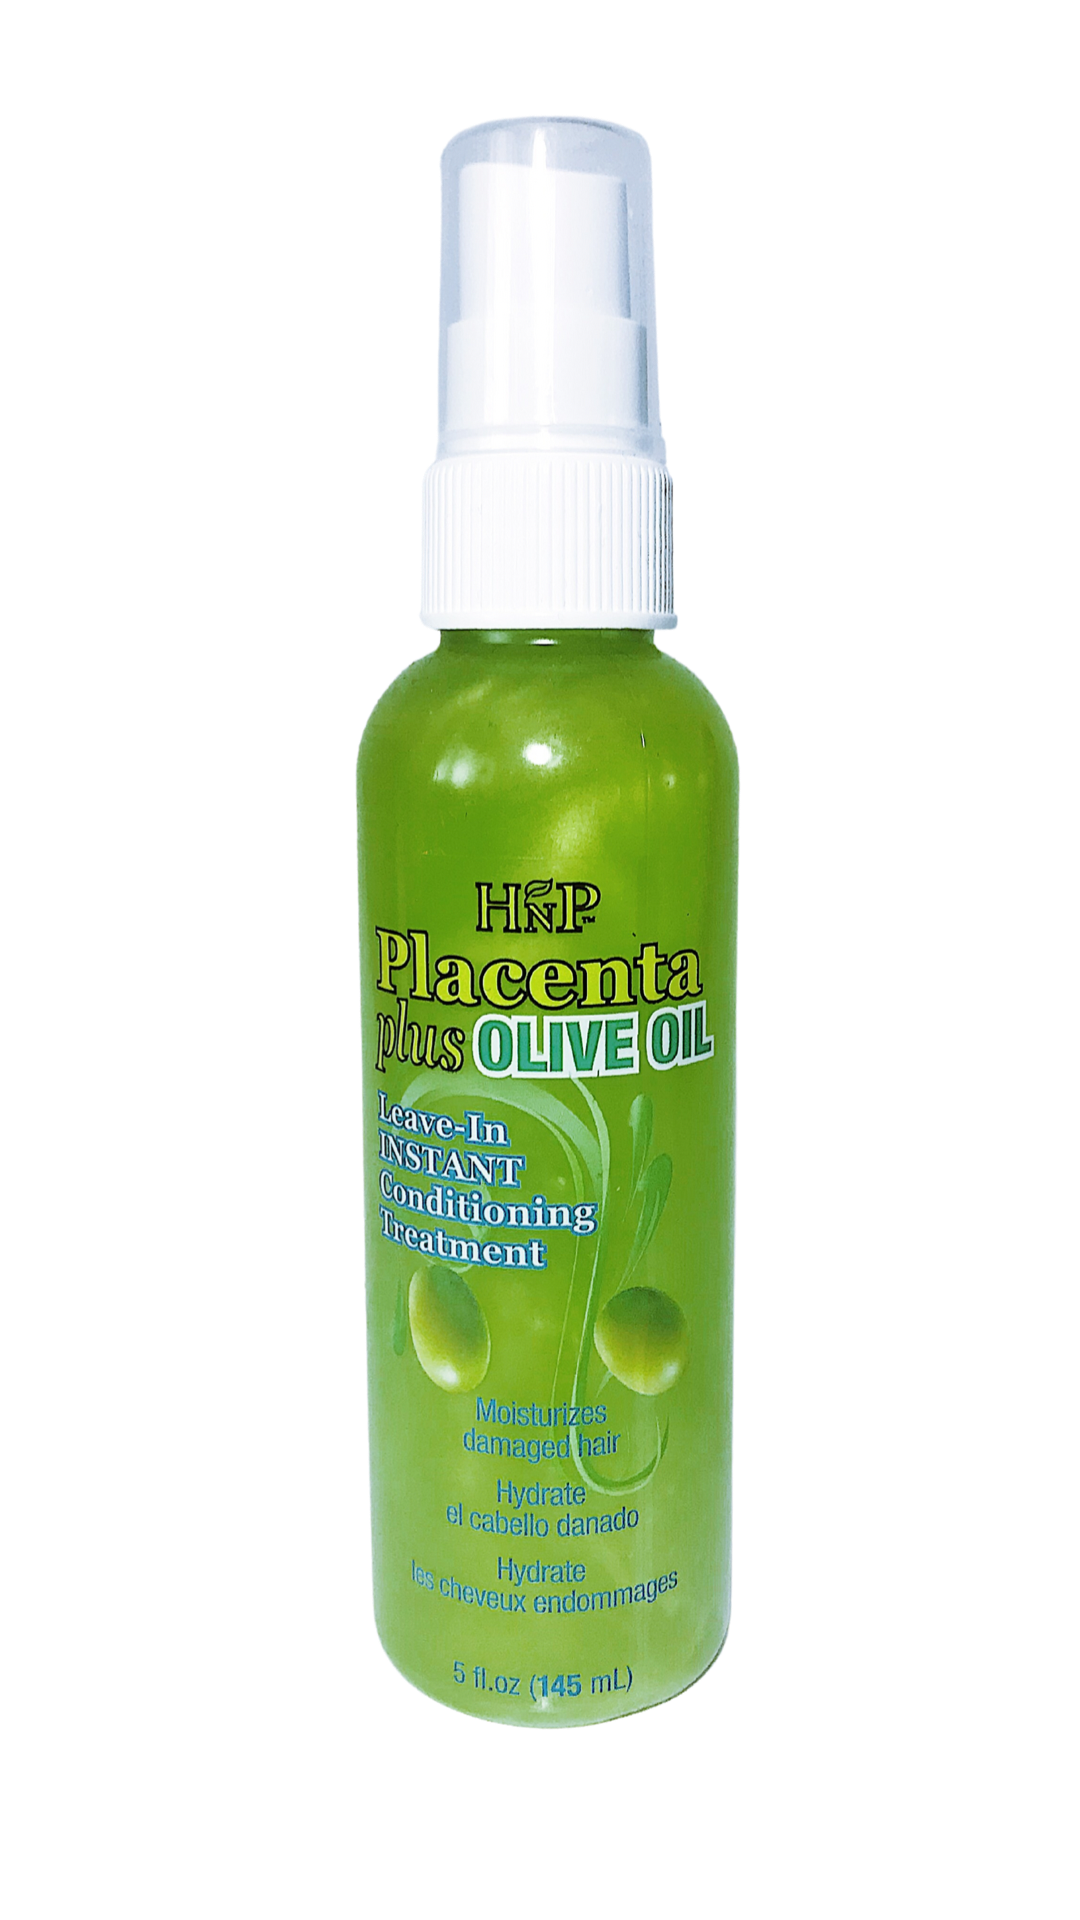 HnP-Placenta-plus-Olive-Oil-Leave-In-Instant-Conditioning-Treatment.jpg